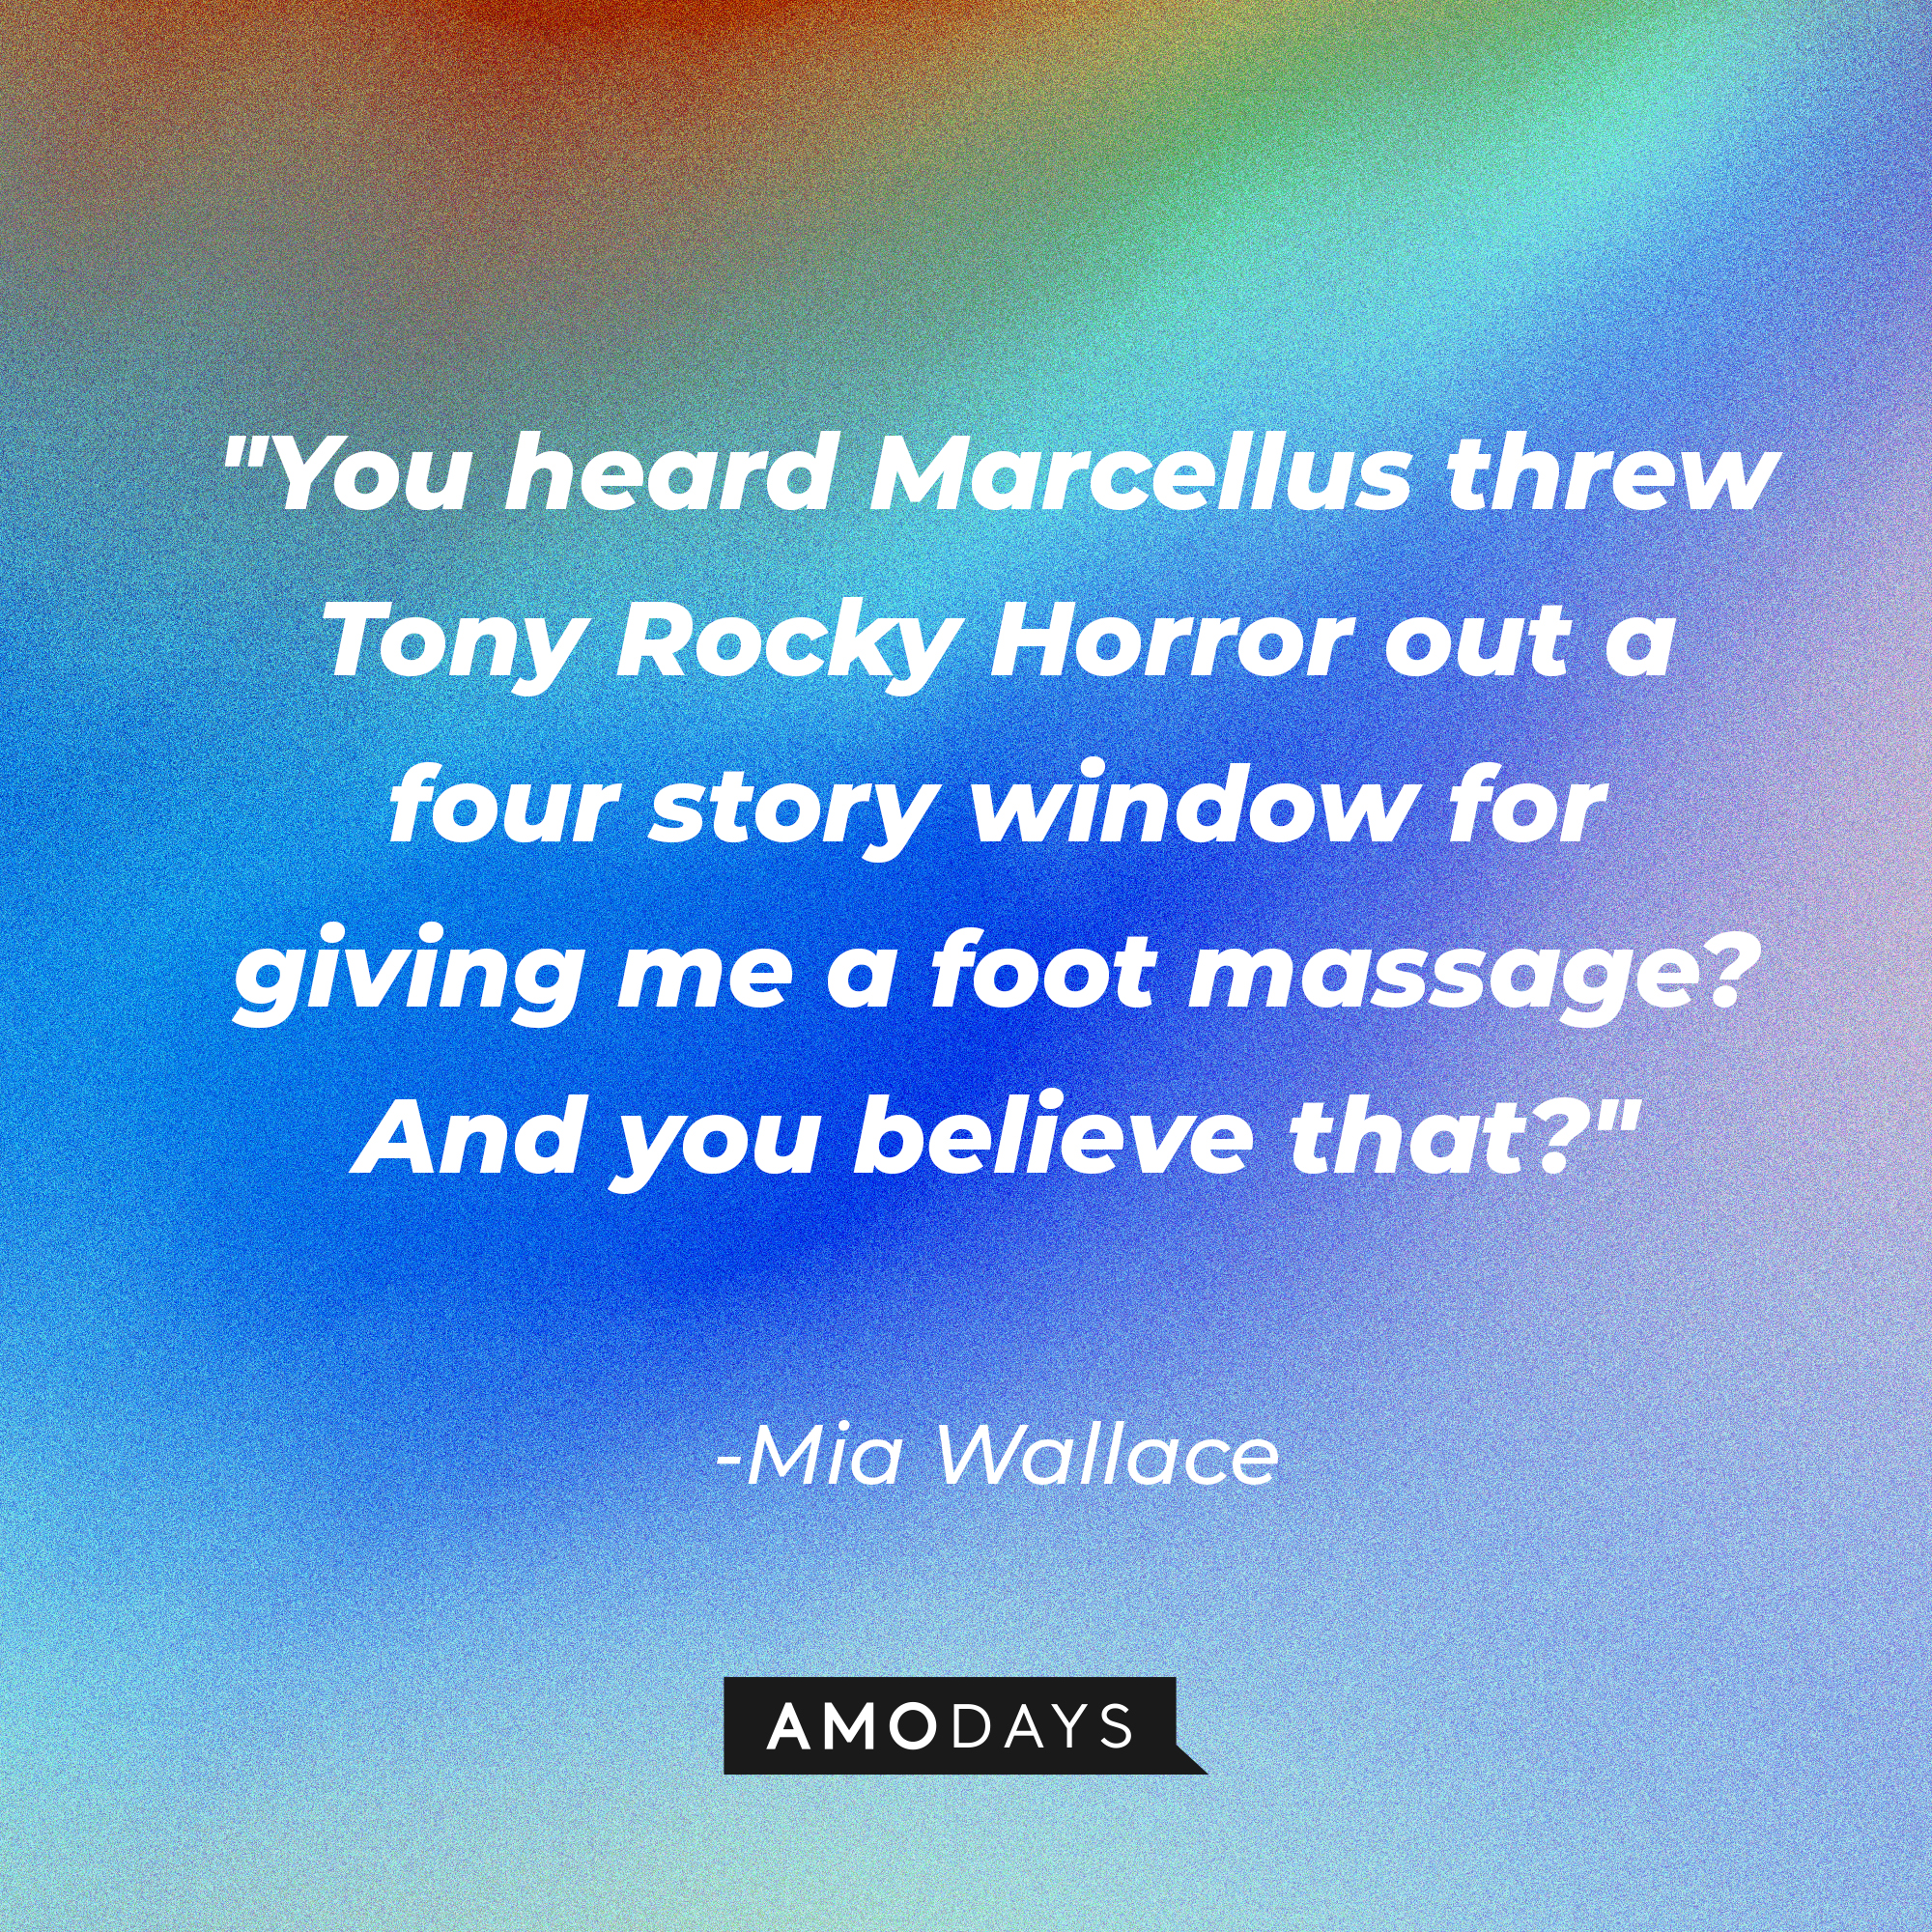 Mia Wallace's quote: "You heard Marcellus threw Tony Rocky Horror out a four story window for giving me a foot massage? And you believe that?" | Source: AmoDays